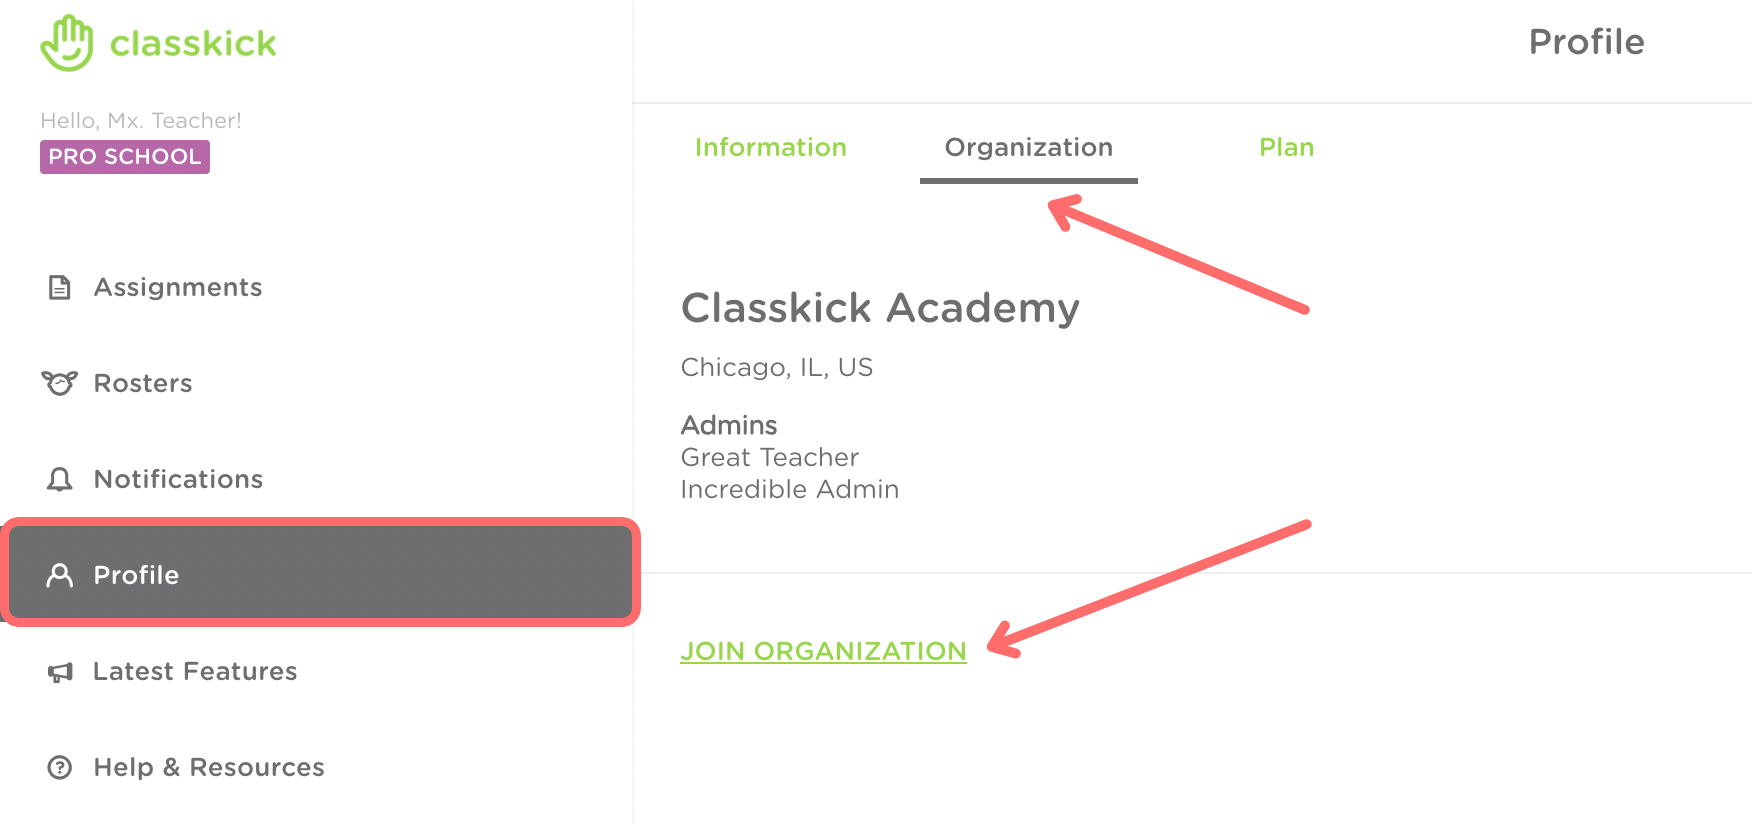 The organization tab in the teacher’s profile. Profile is outlined in red on the left hand side of the screen. A red arrow points to organization at the top of the screen and a button titled join organization at the bottom of the screen.